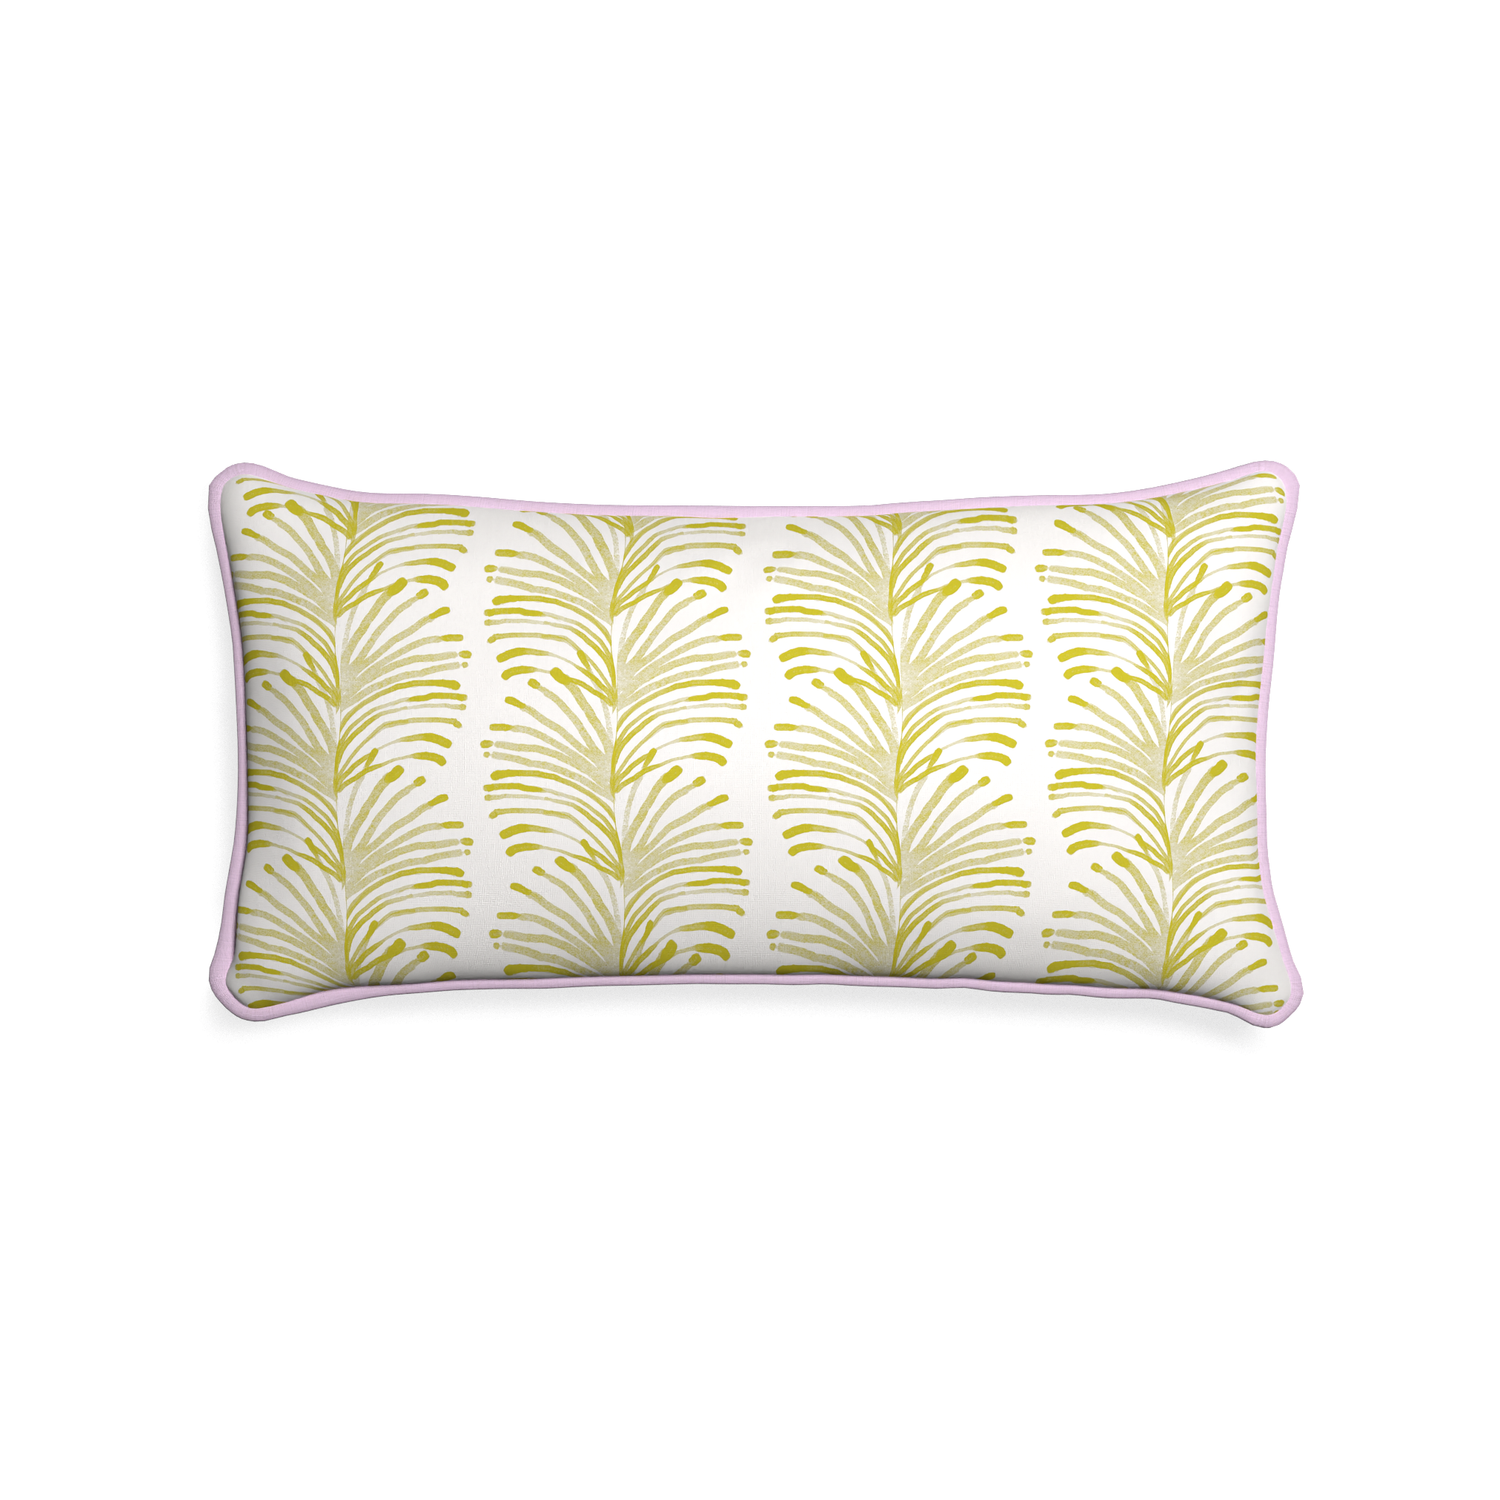 Midi-lumbar emma chartreuse custom yellow stripe chartreusepillow with l piping on white background